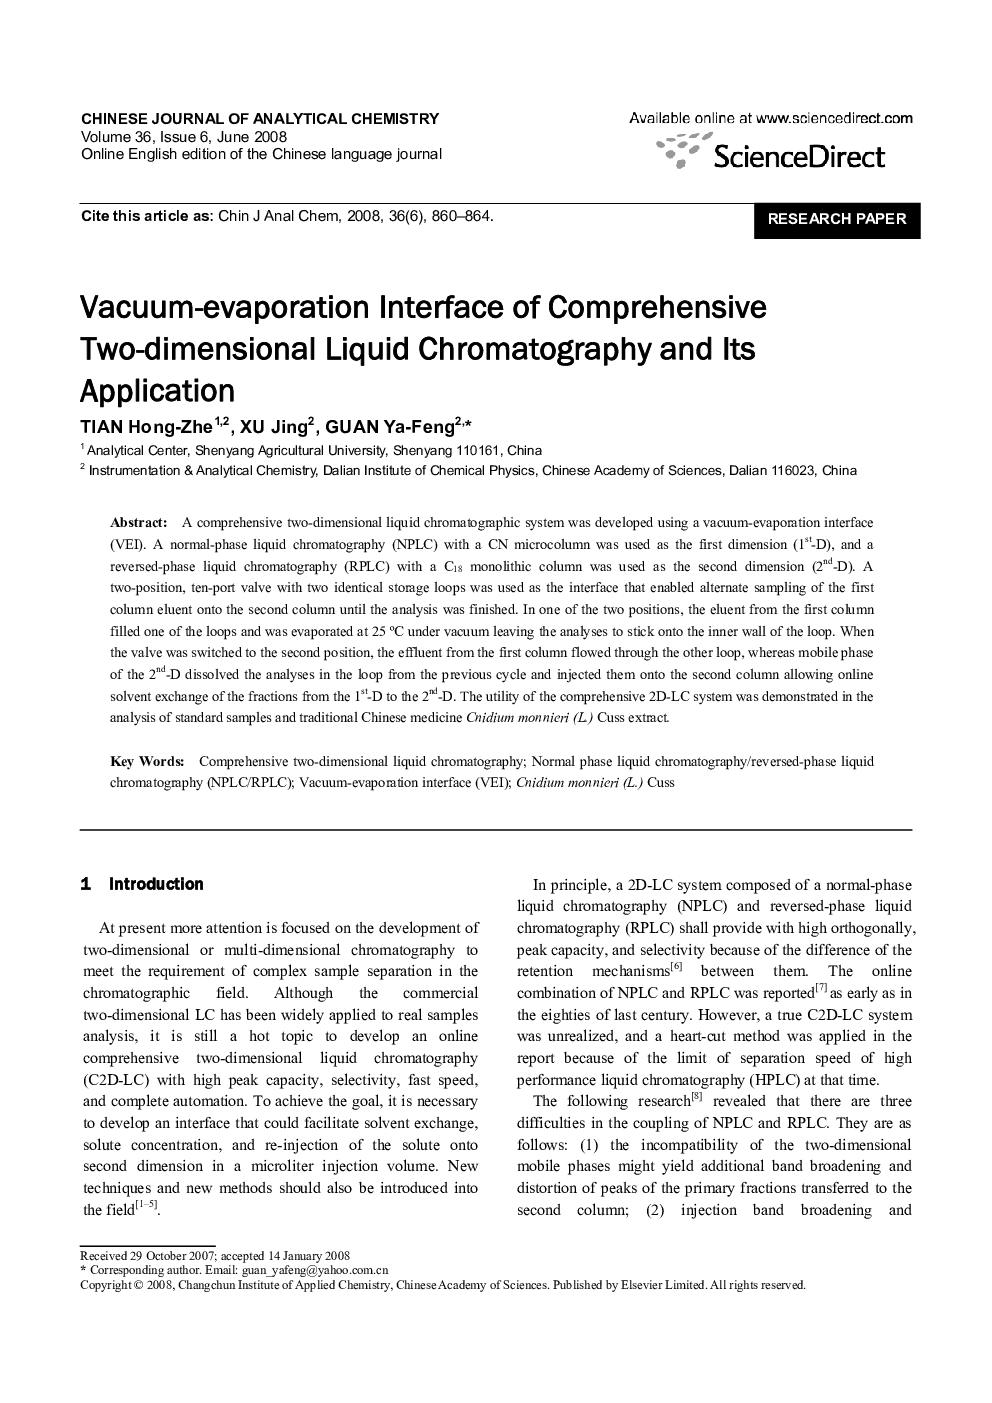 Vacuum-evaporation Interface of Comprehensive Two-dimensional Liquid Chromatography and Its Application